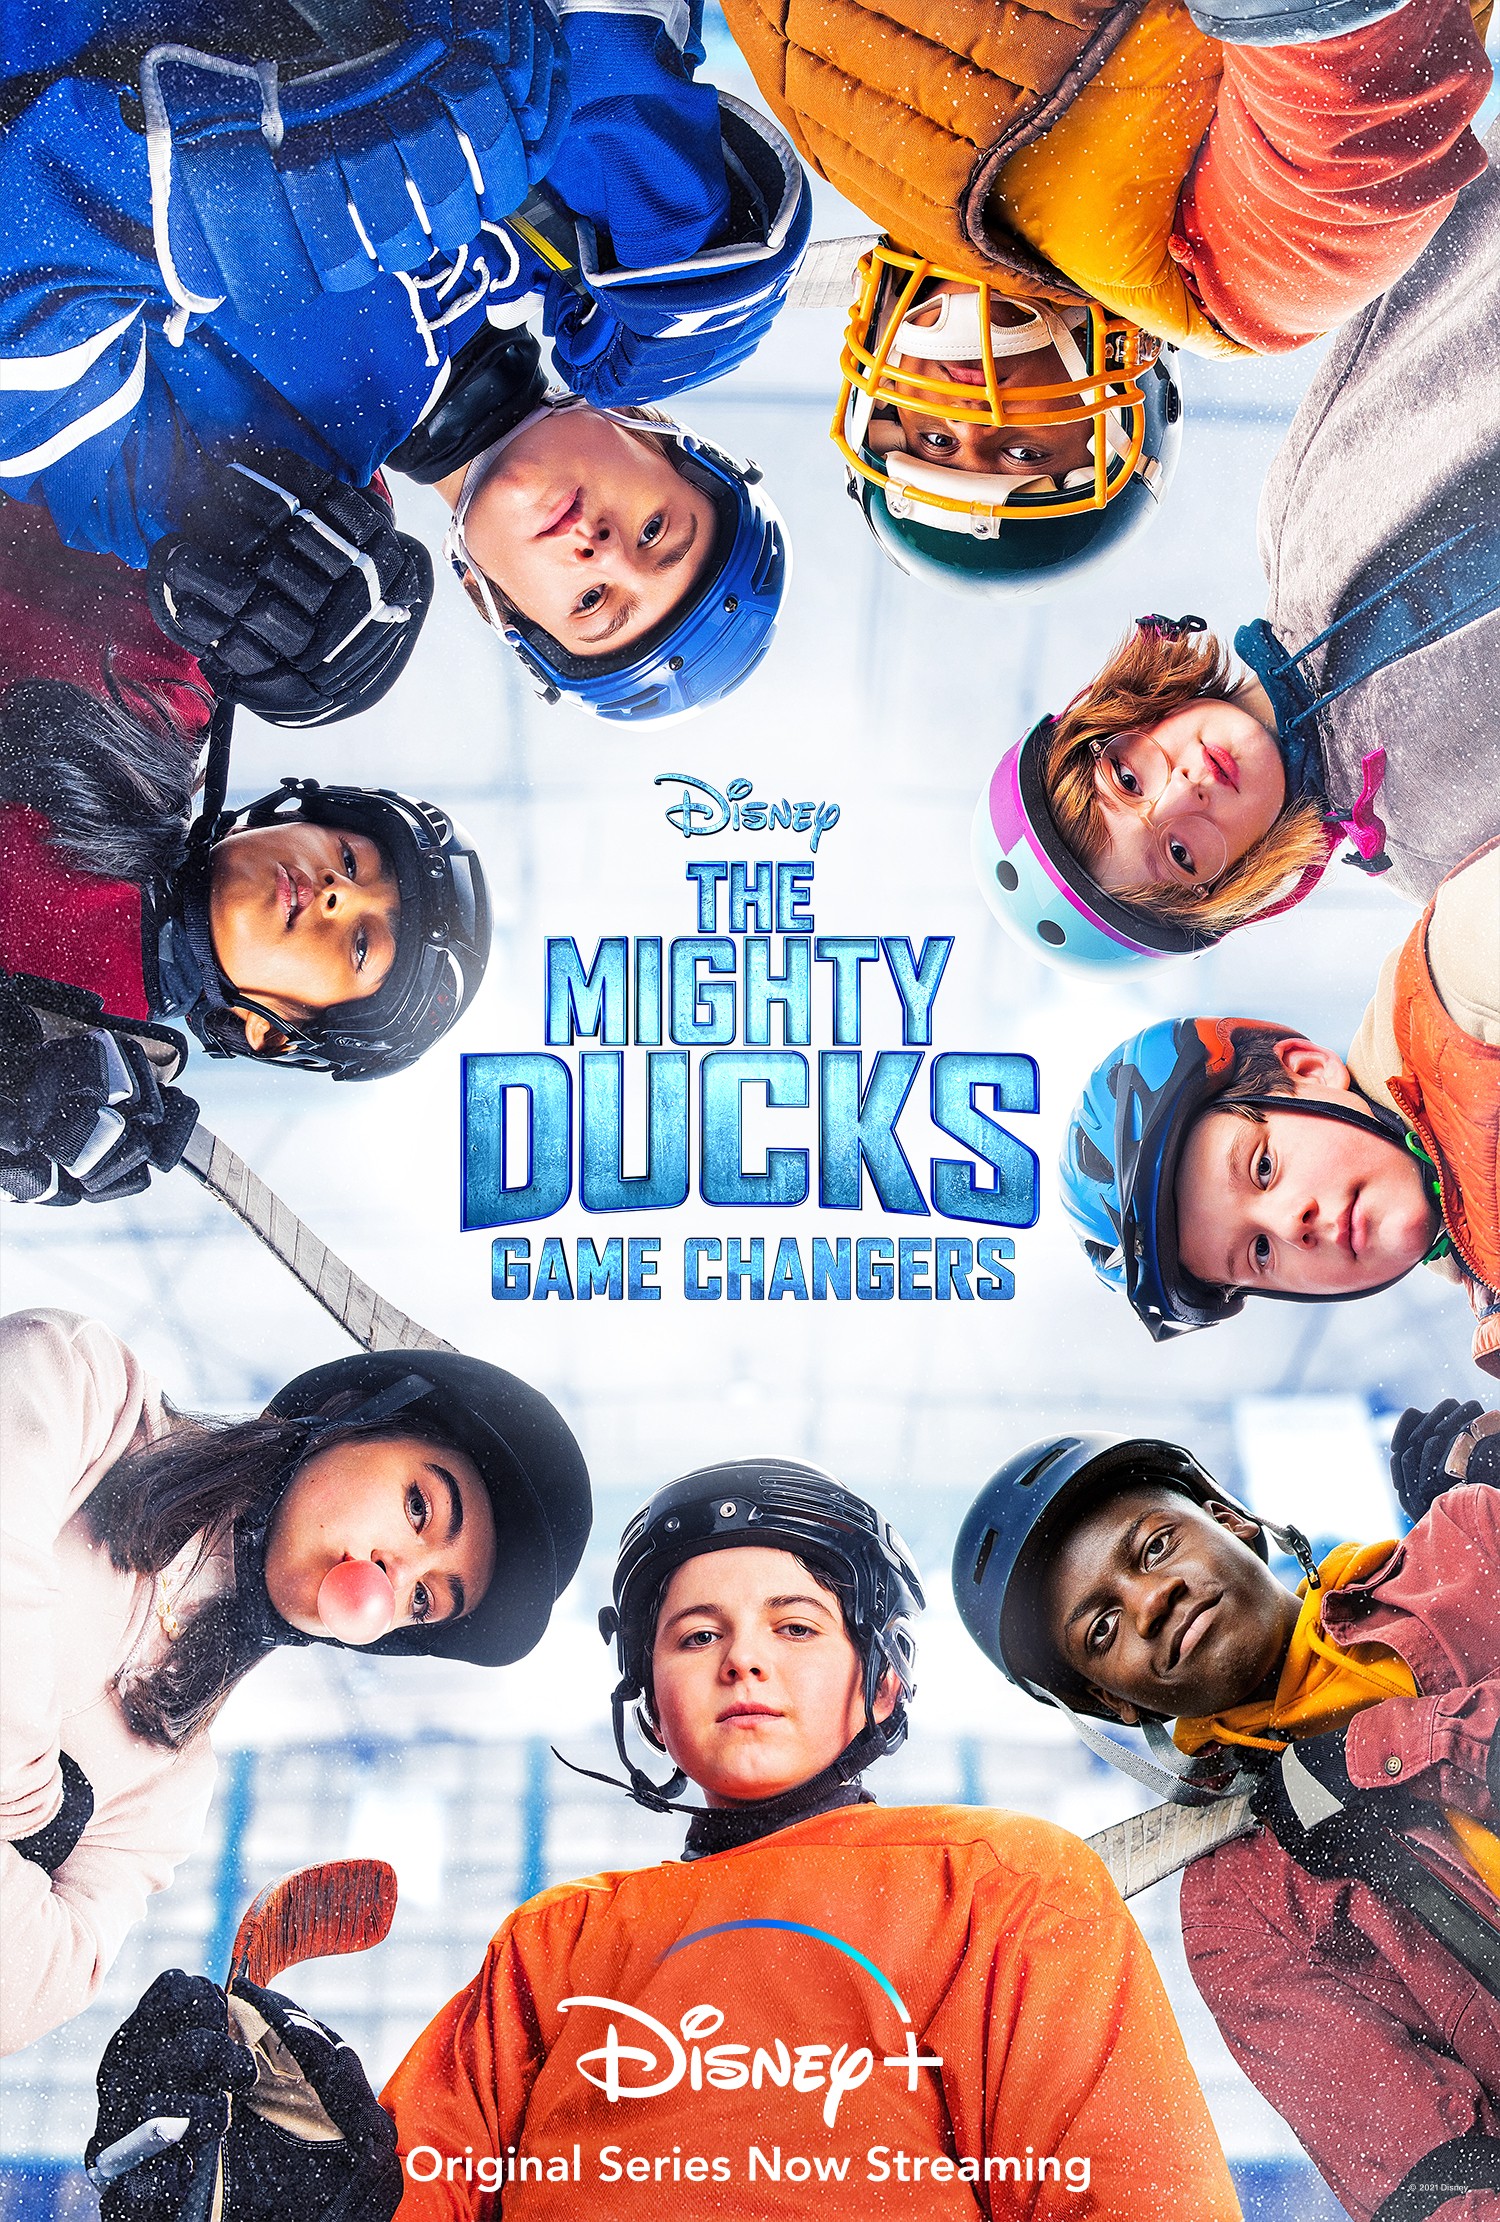 Review: The Mighty Ducks Game Changers, Season 1, Episode 7 - Puck Junk